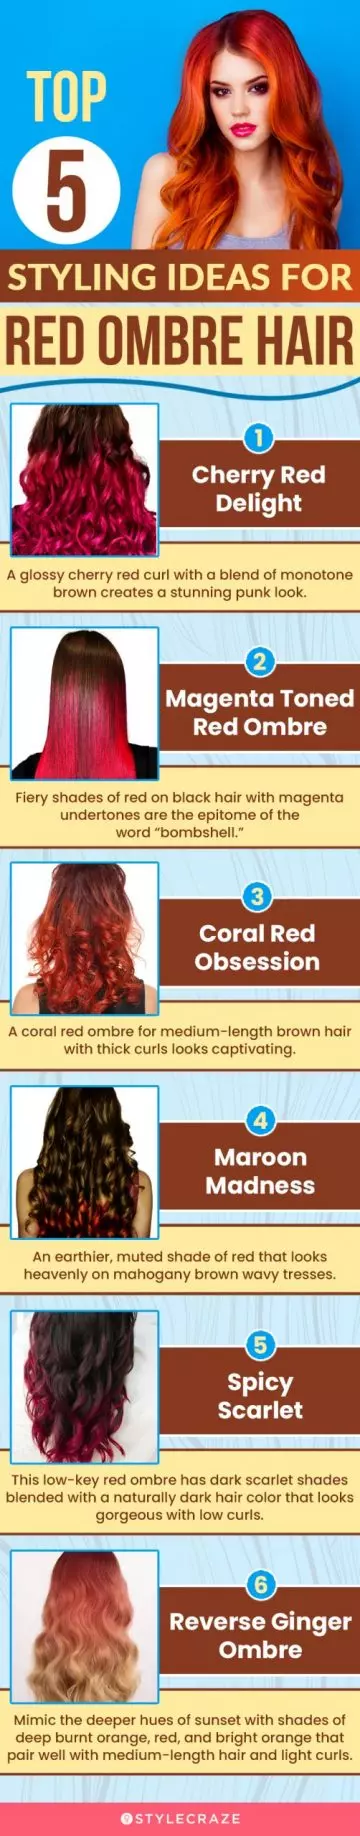 top 5 styling ideas for red ombre hair (infographic)